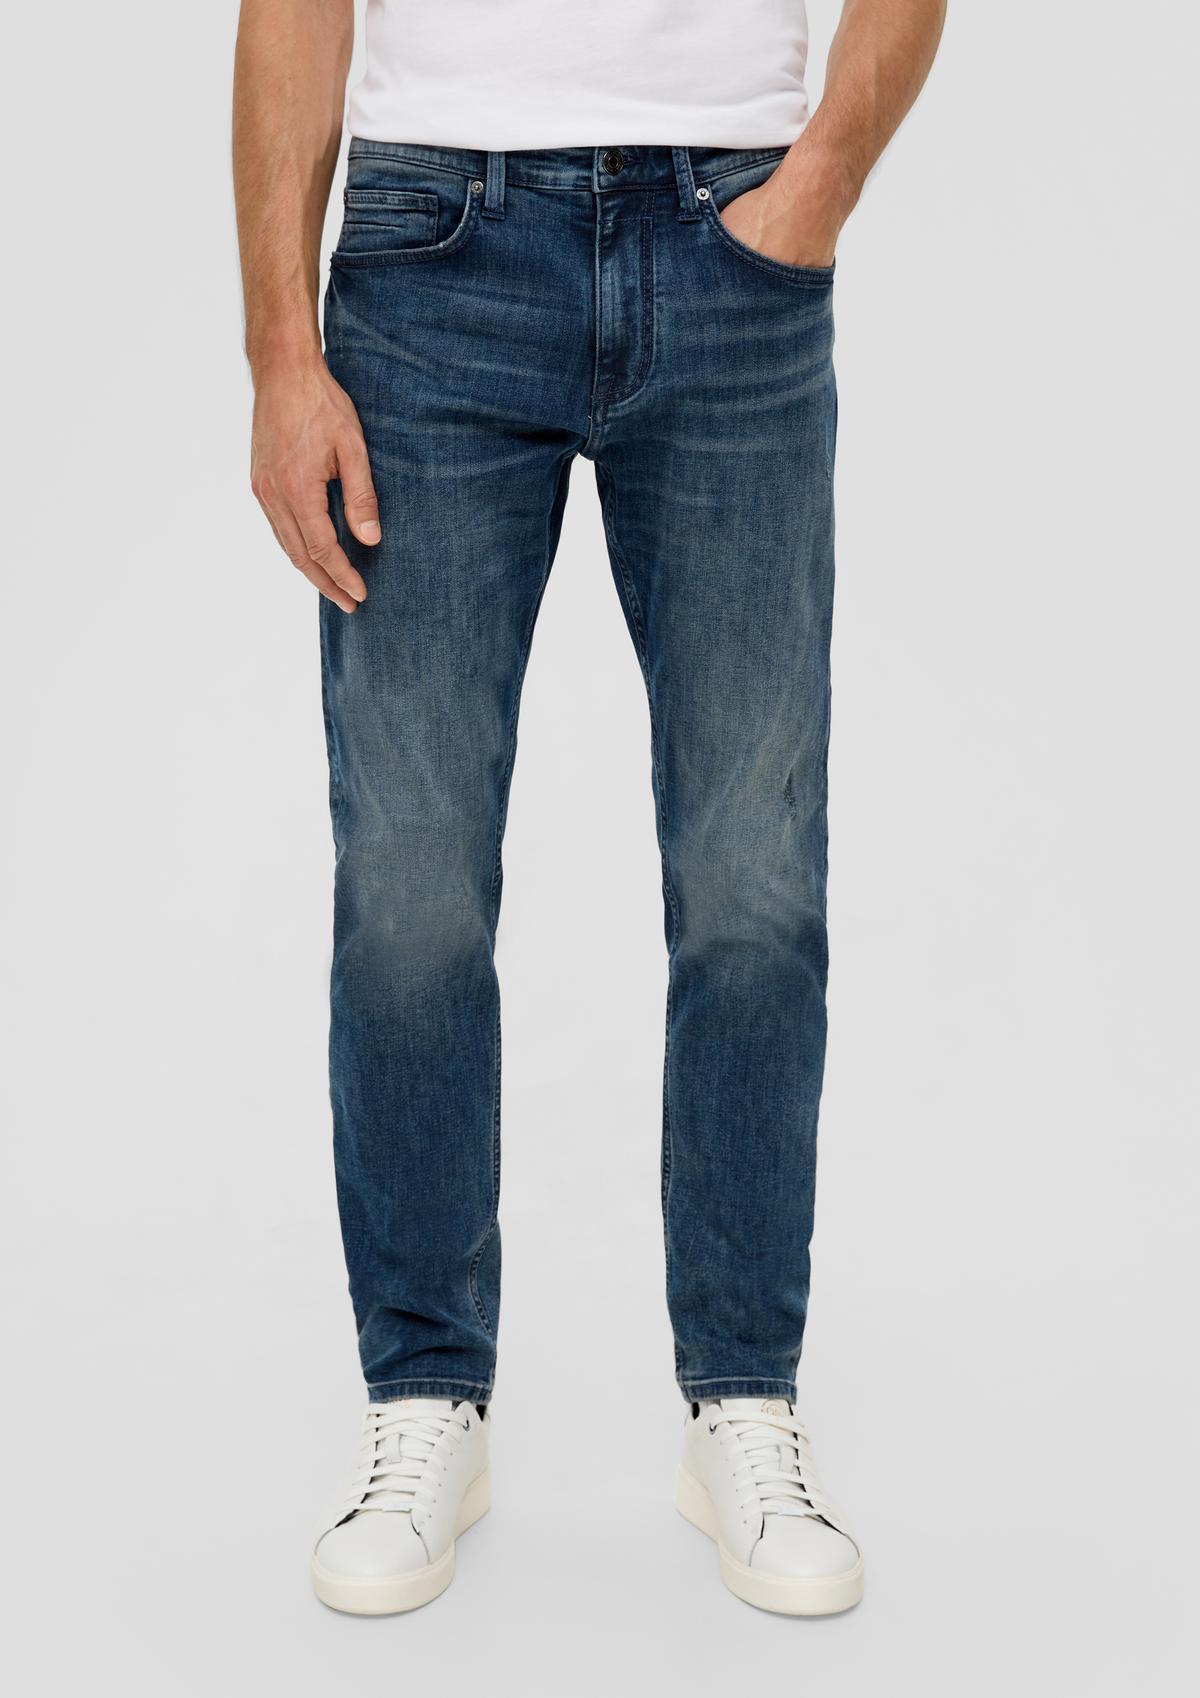 Jeans / Regular Fit / Mid Rise / Tapered Leg / 5-Pocket Style - deep blue